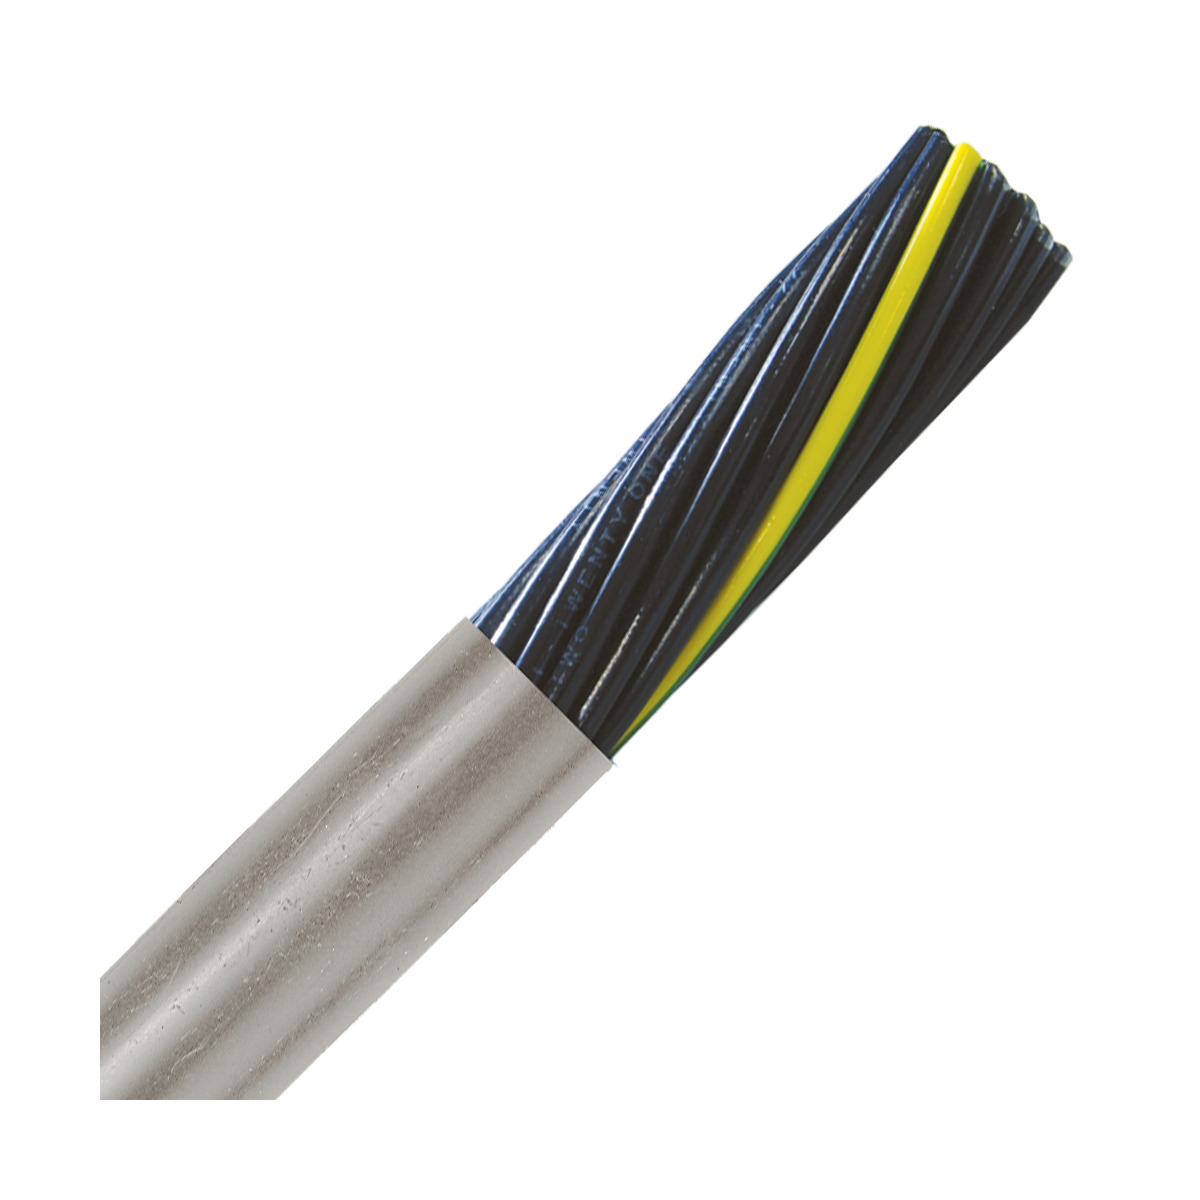 ÖLFLEX® 190 power and control cable